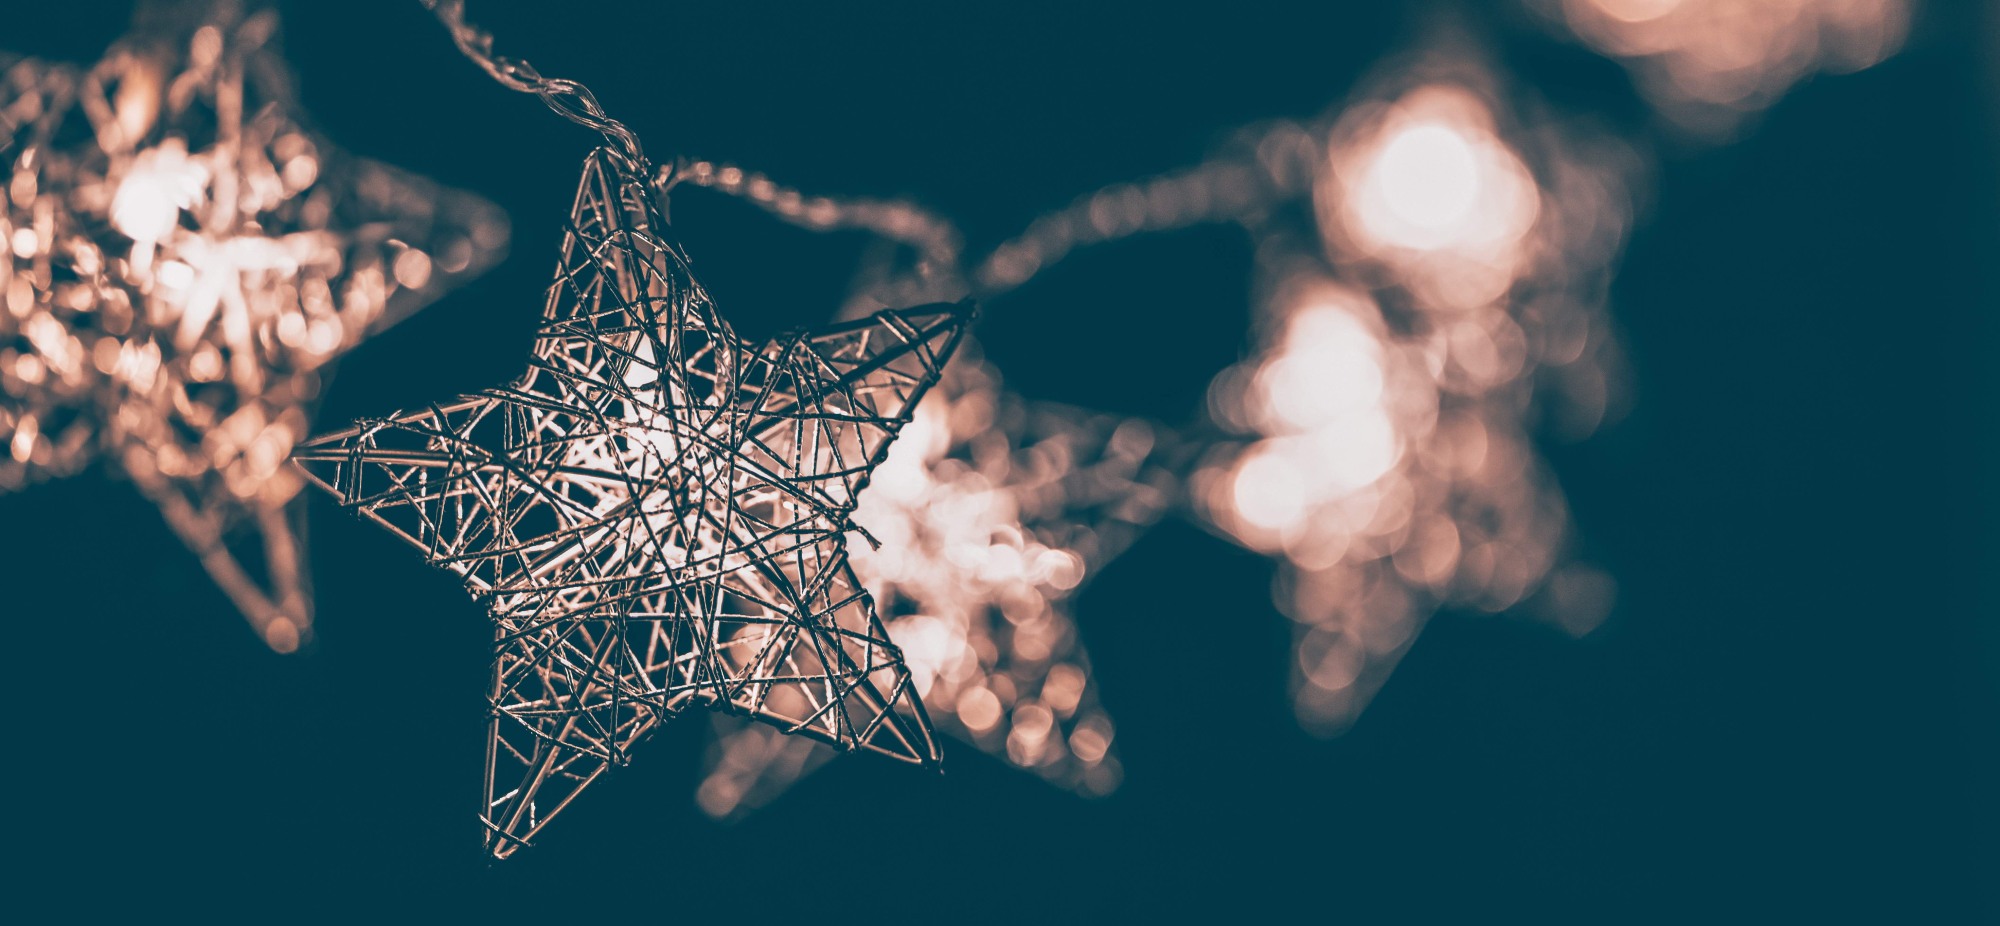 image of star string lights twinkling at night